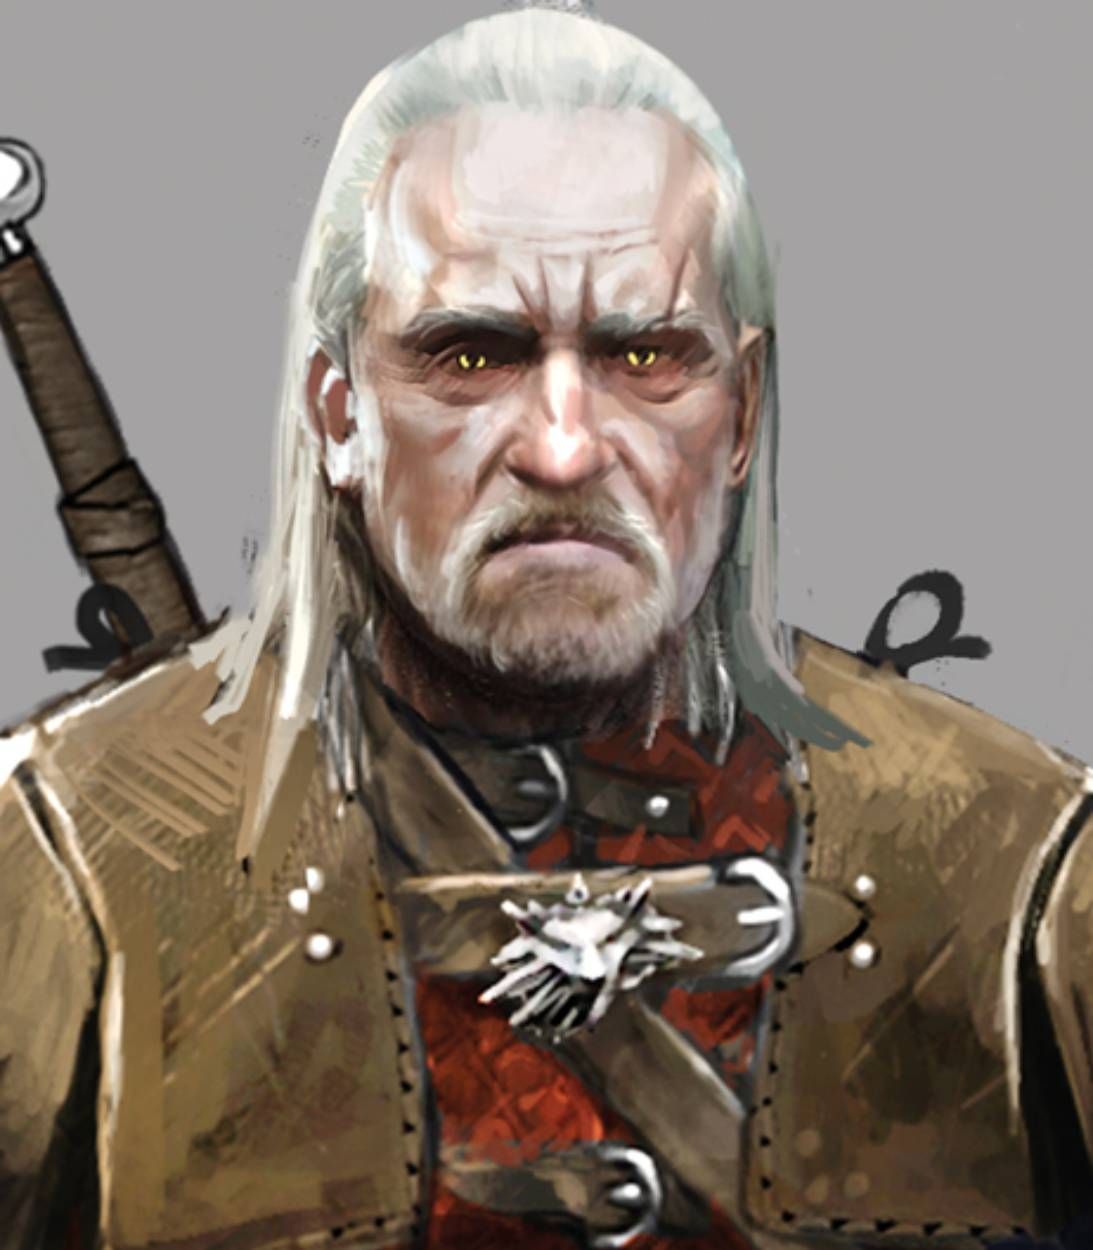 Vesemir The Witcher image vertical